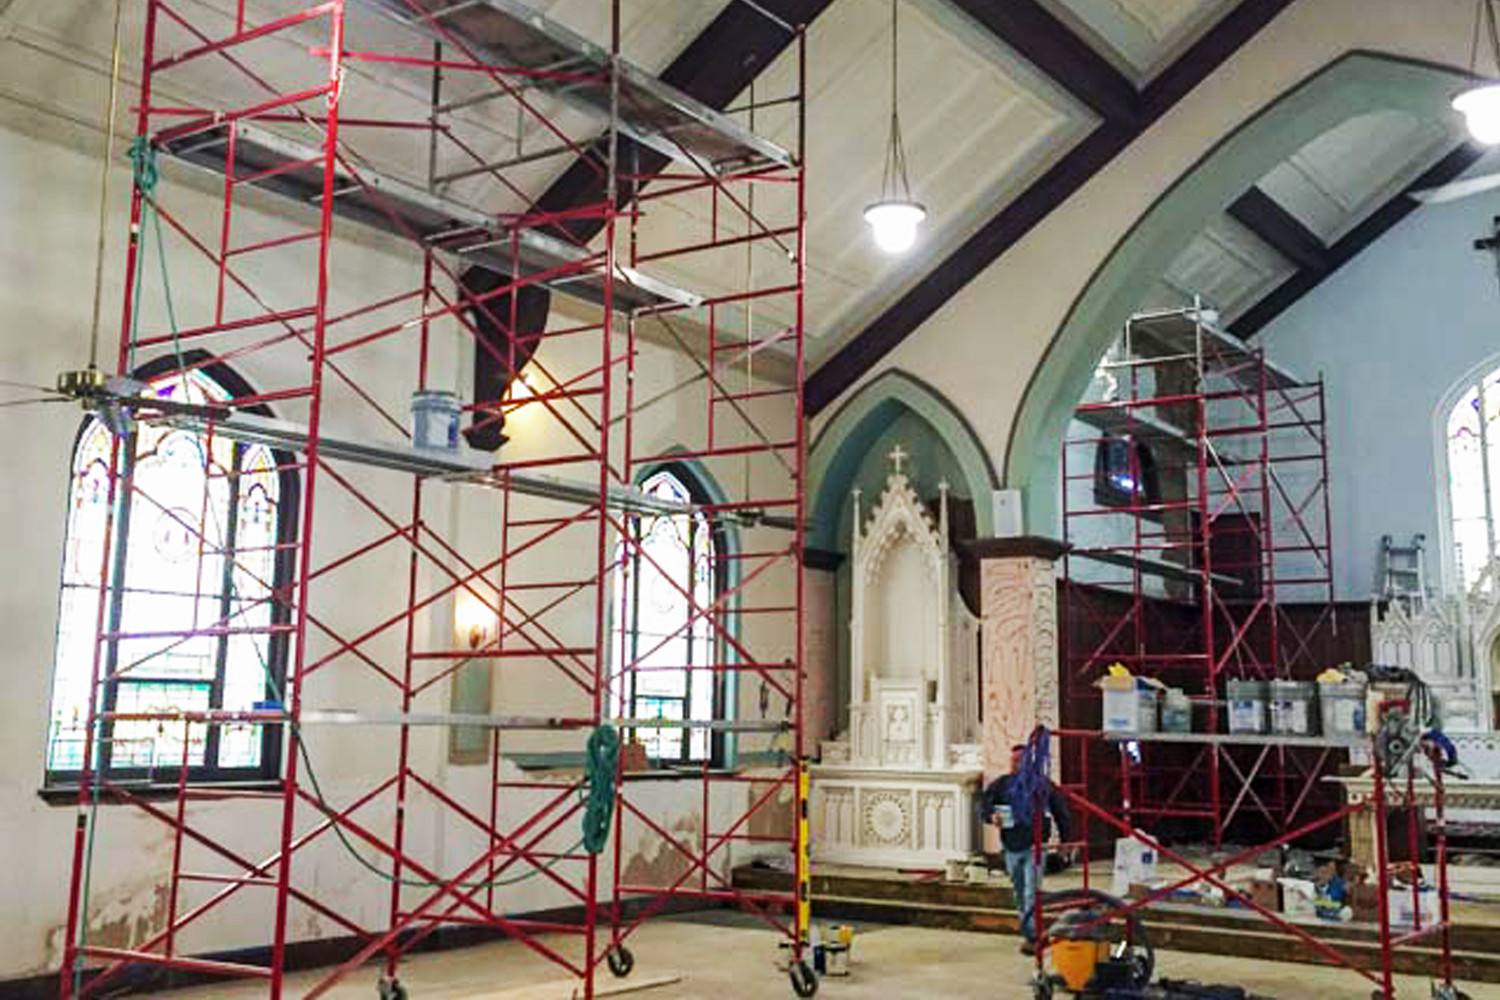 Scaffolding enabled the walls and ceiling to be repaired and repainted.